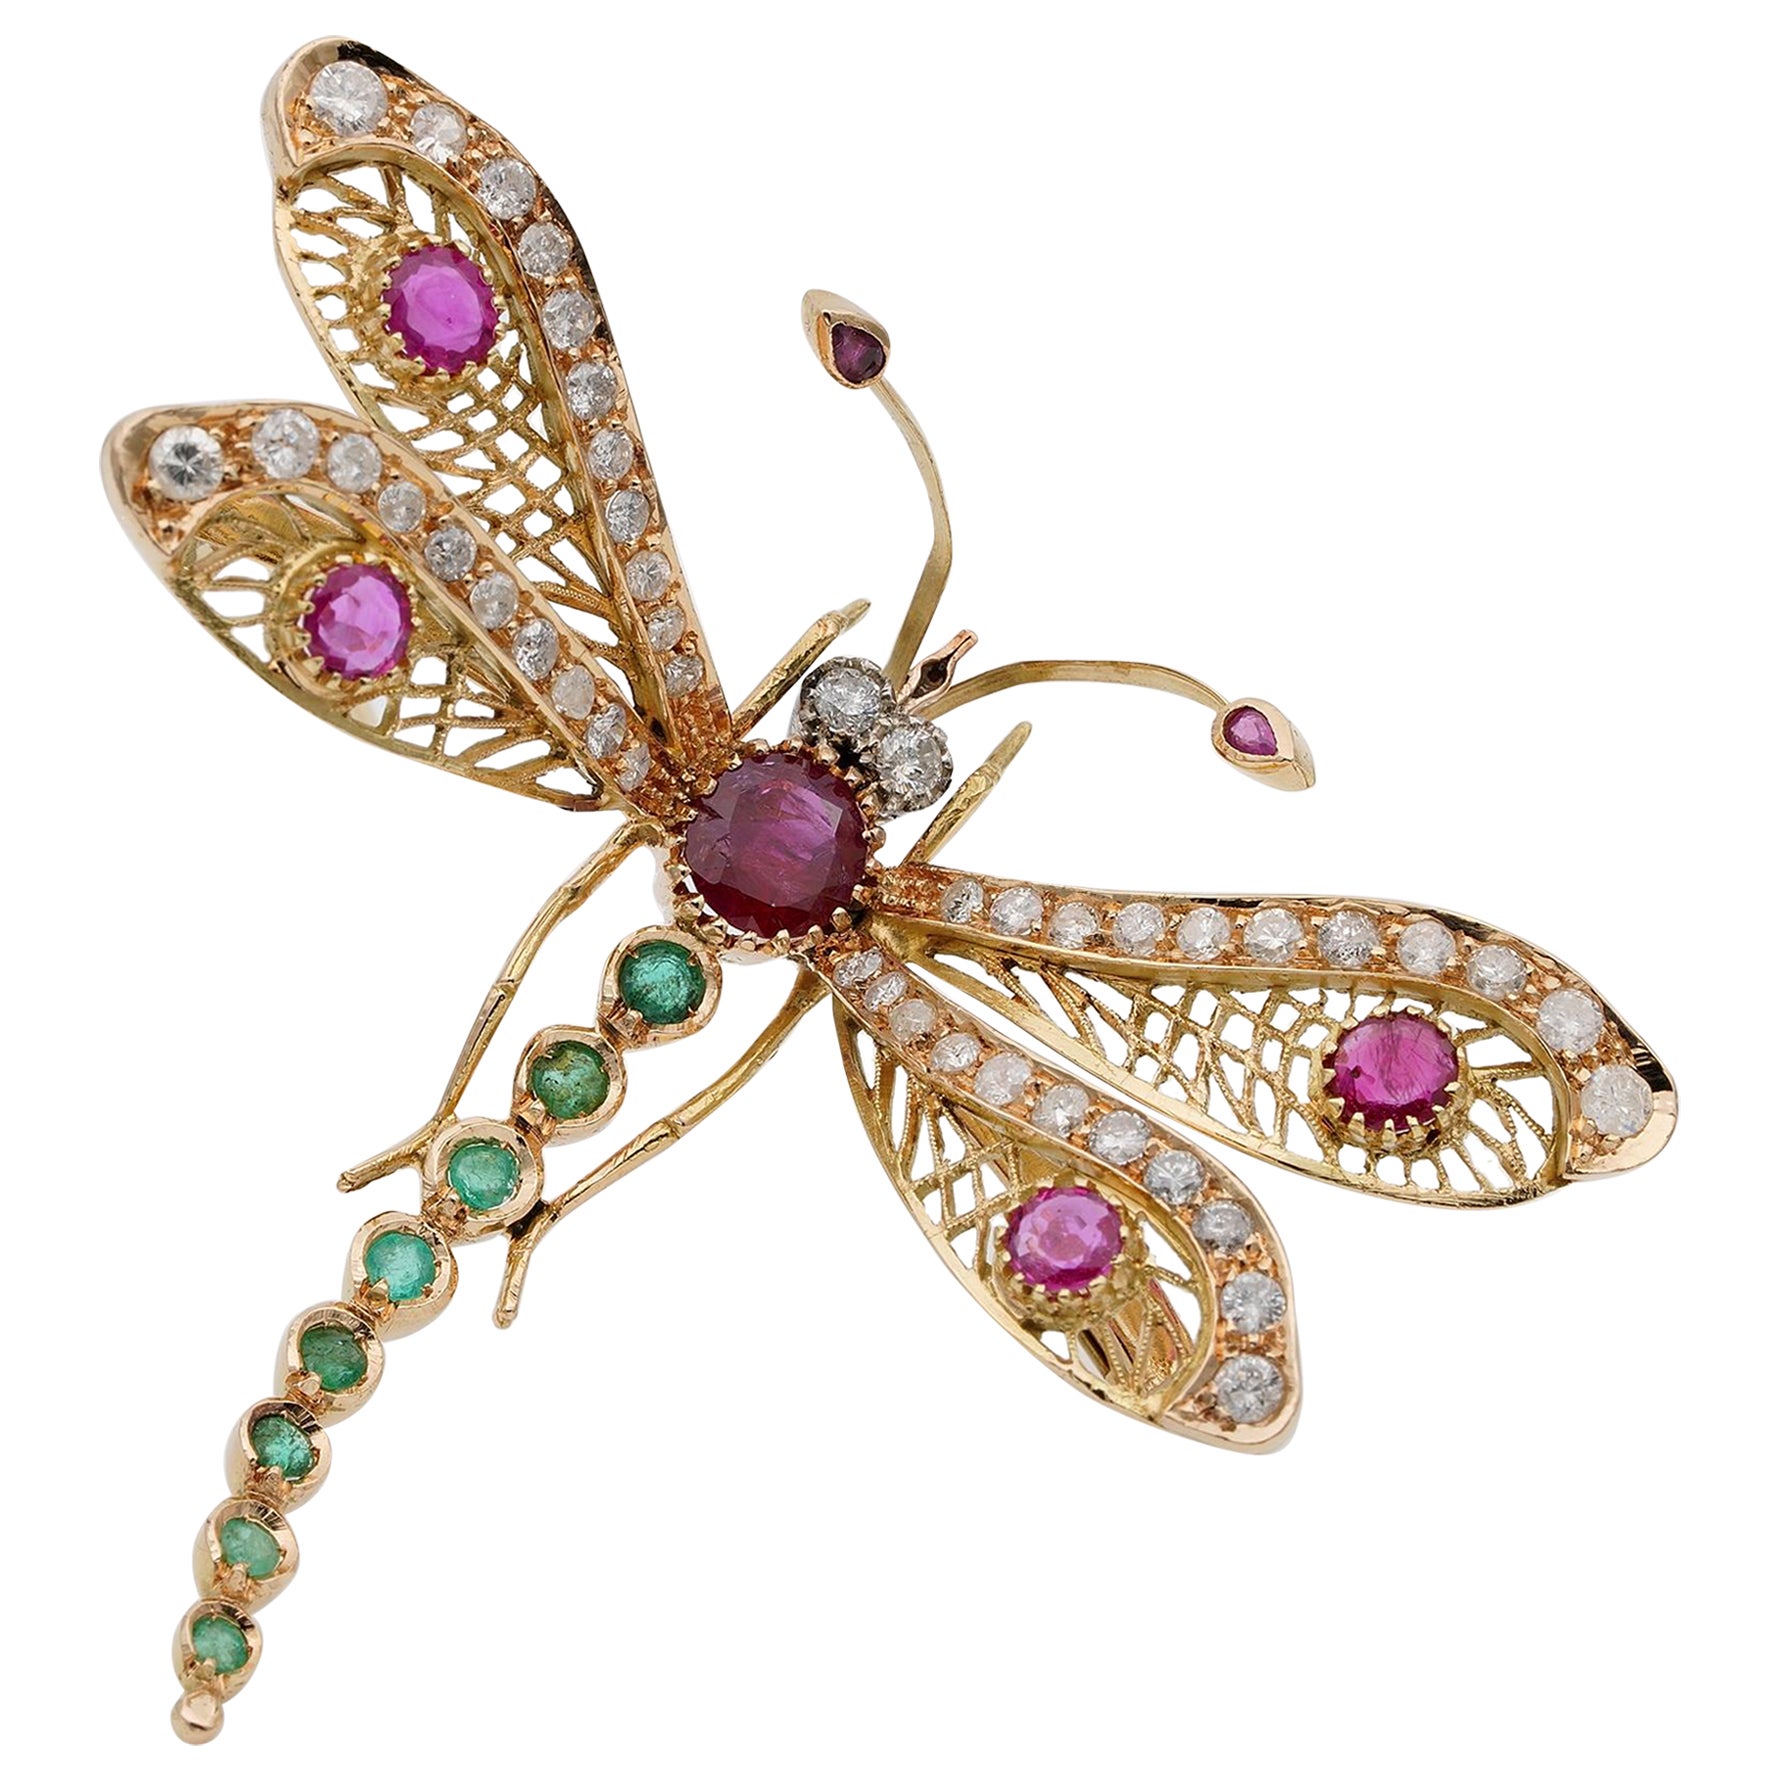 Retro 7.40 Ct Diamond Ruby Emerald 18 Kt Dragonfly Brooch For Sale